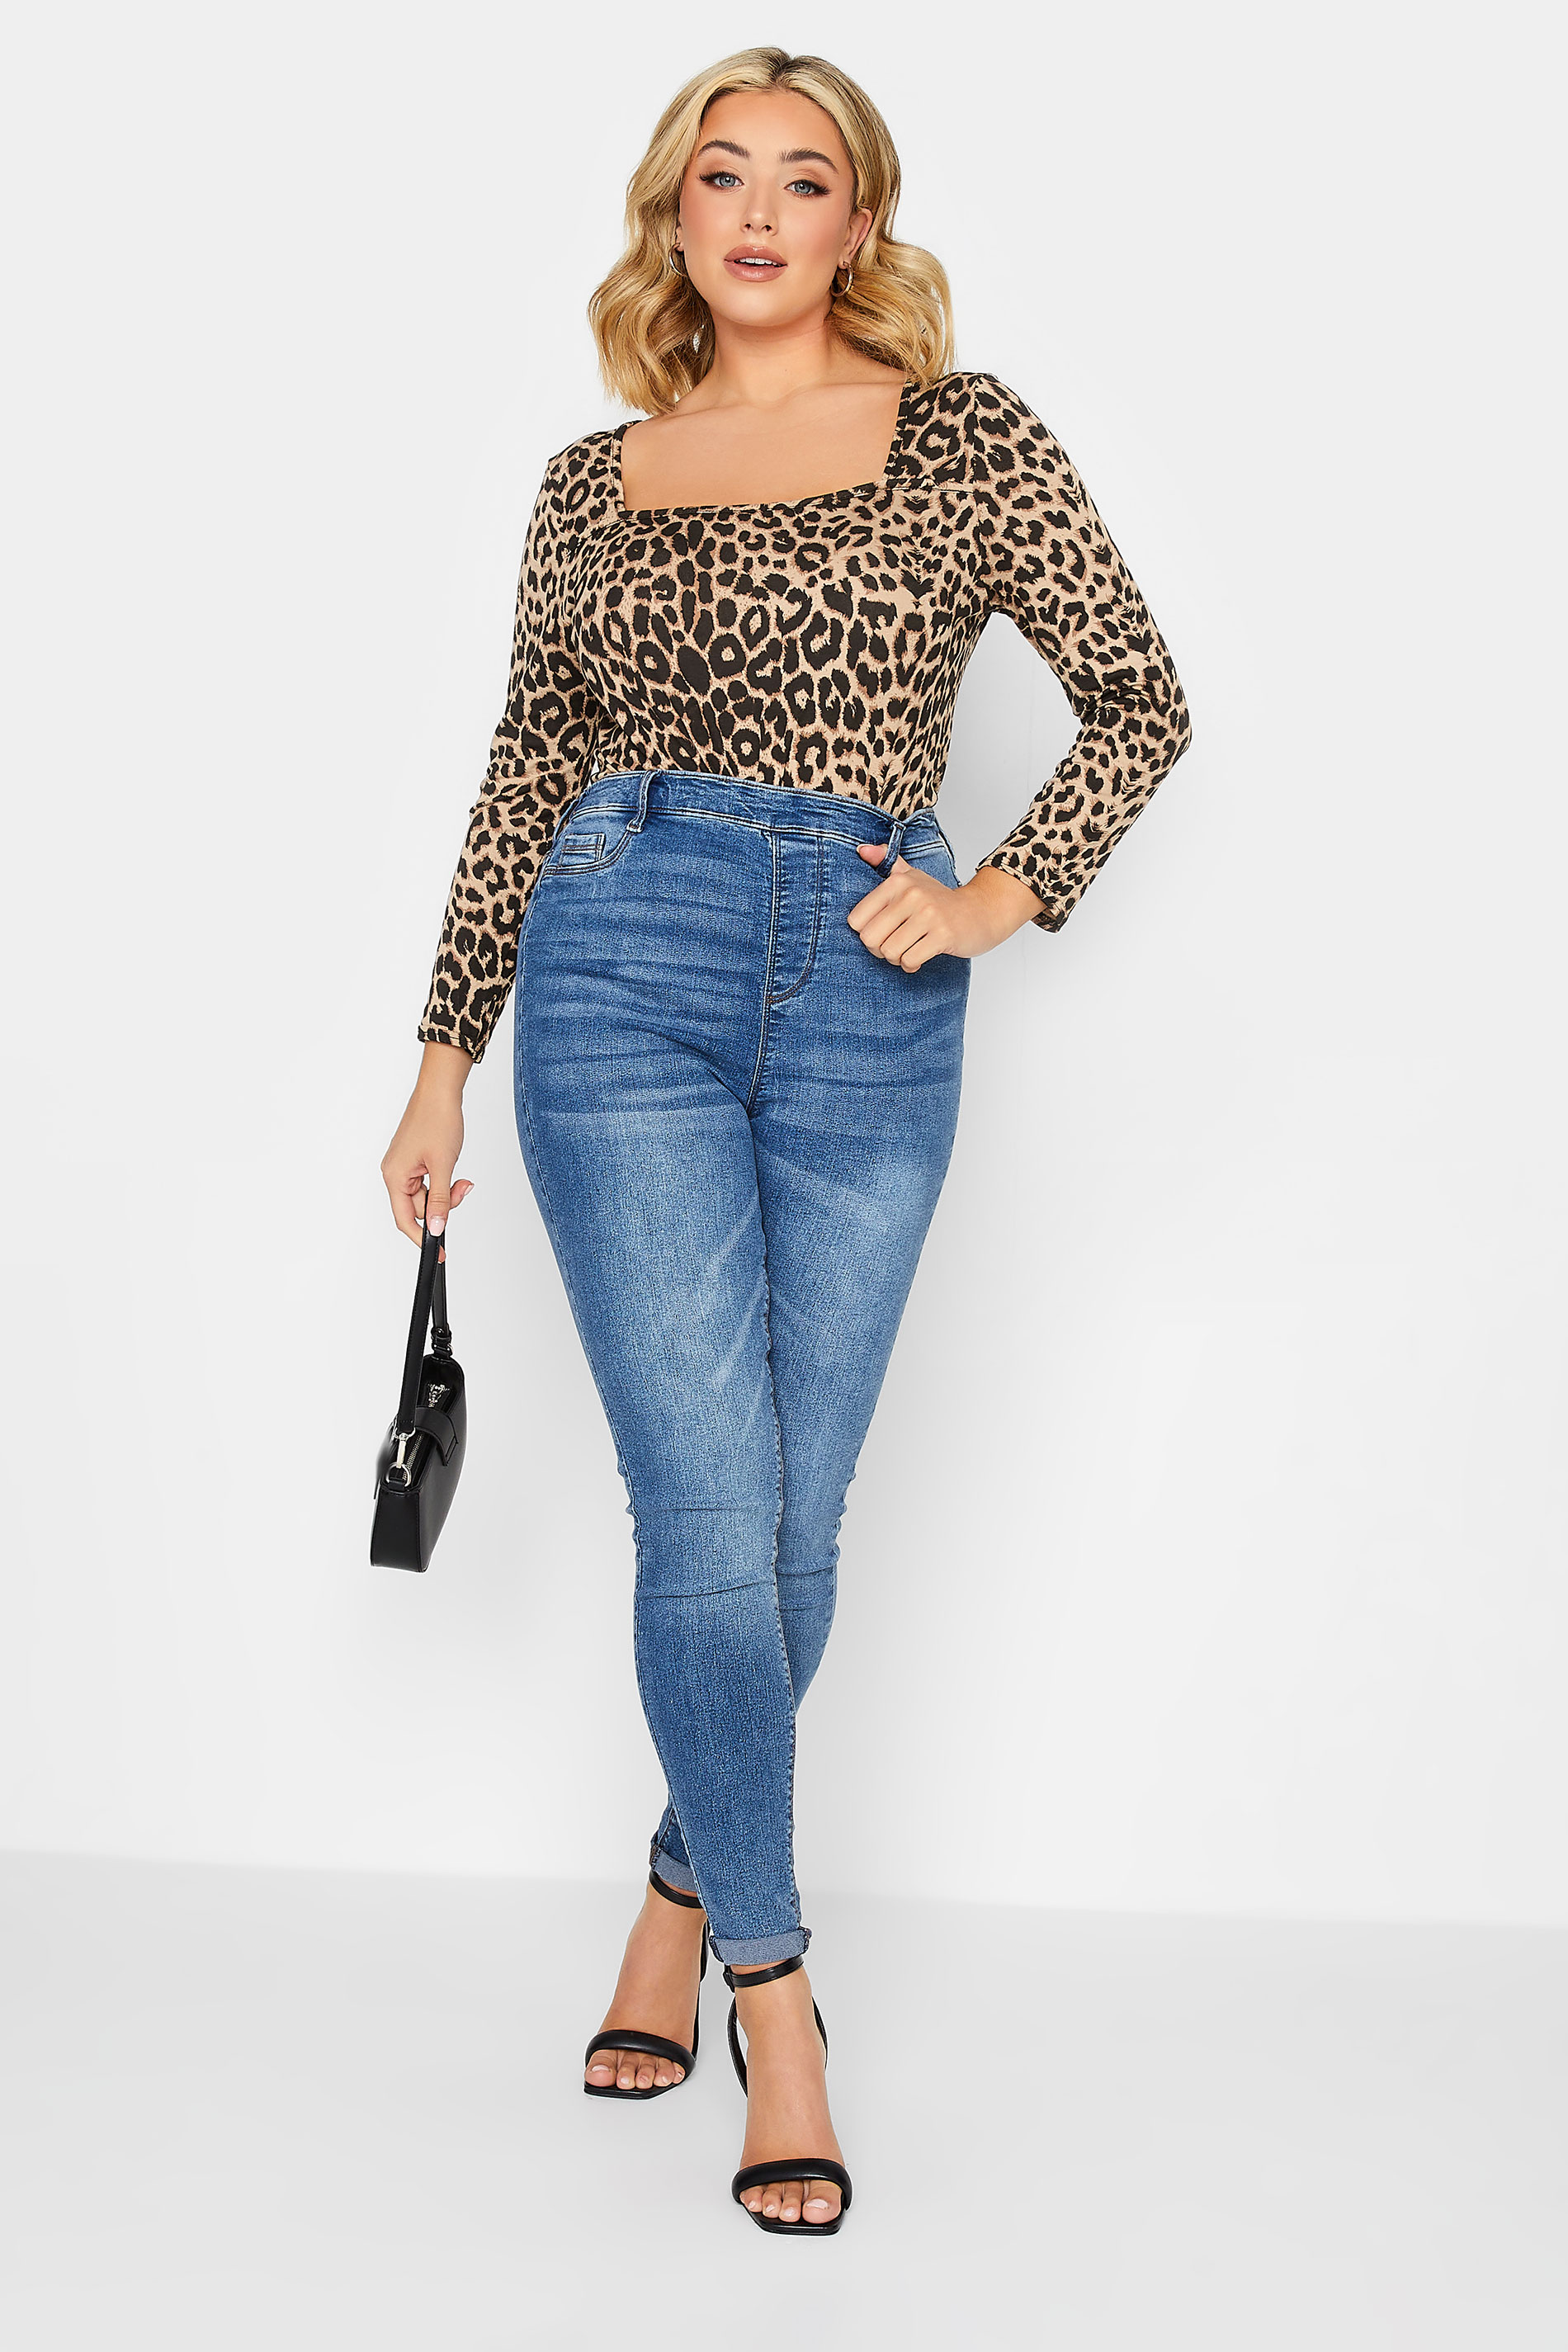 YOURS PETITE Plus Size Brown Leopard Print Square Neck Top | Yours Clothing 2